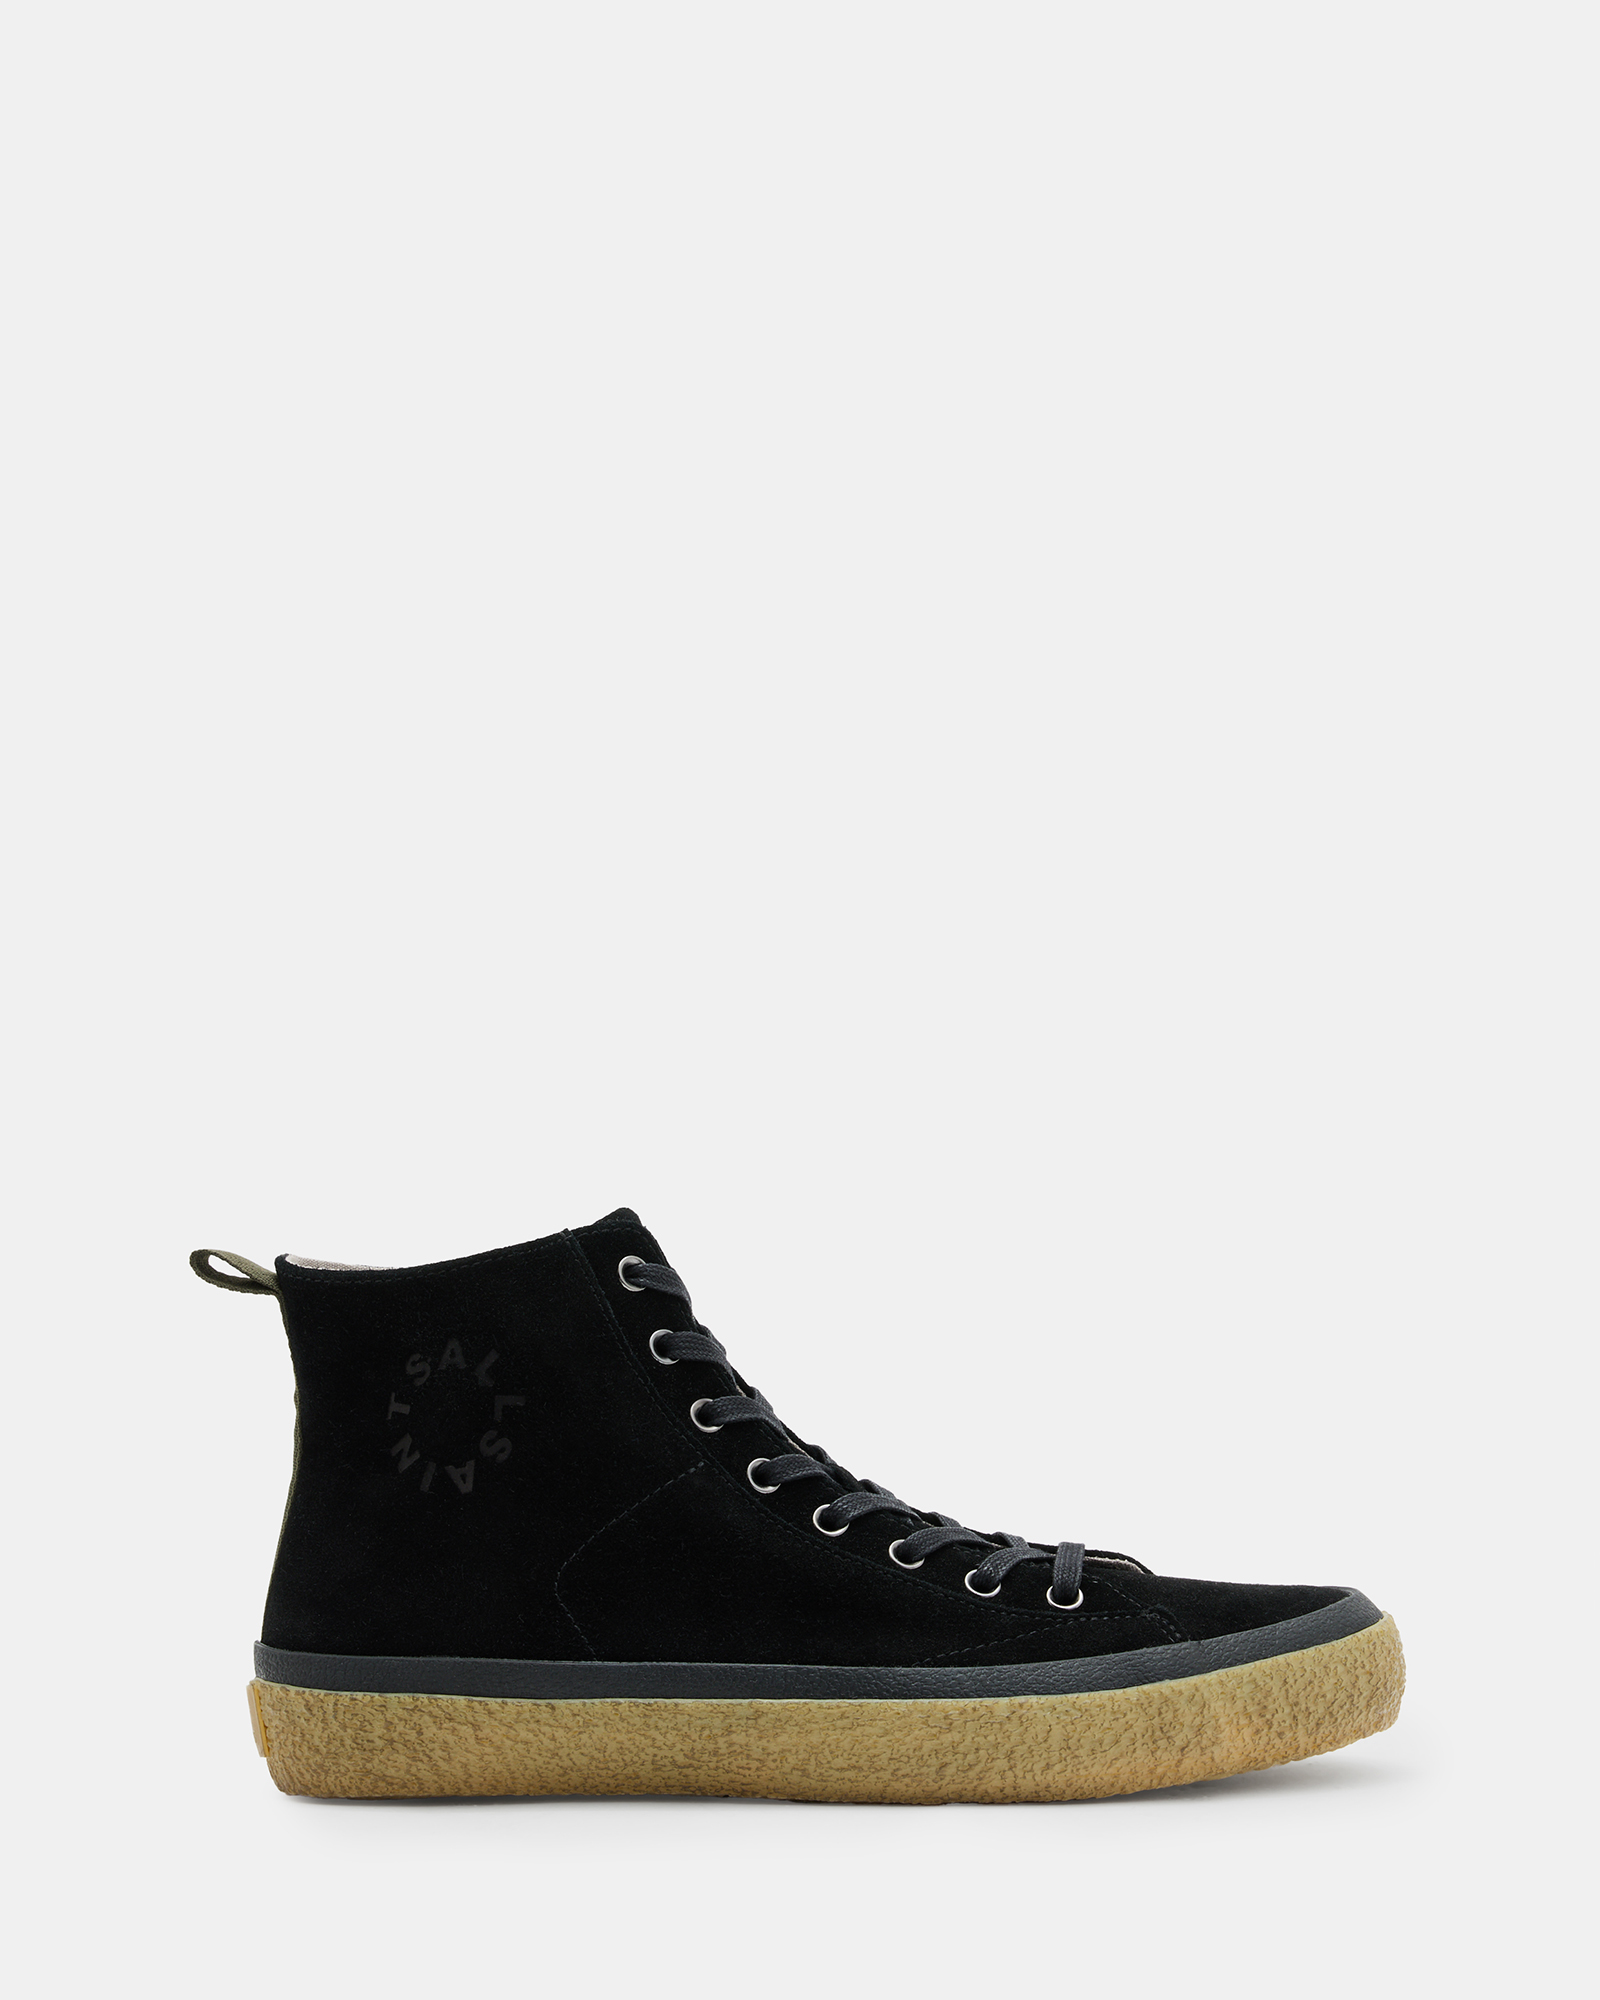 AllSaints Crister Logo Leather High Top Trainers